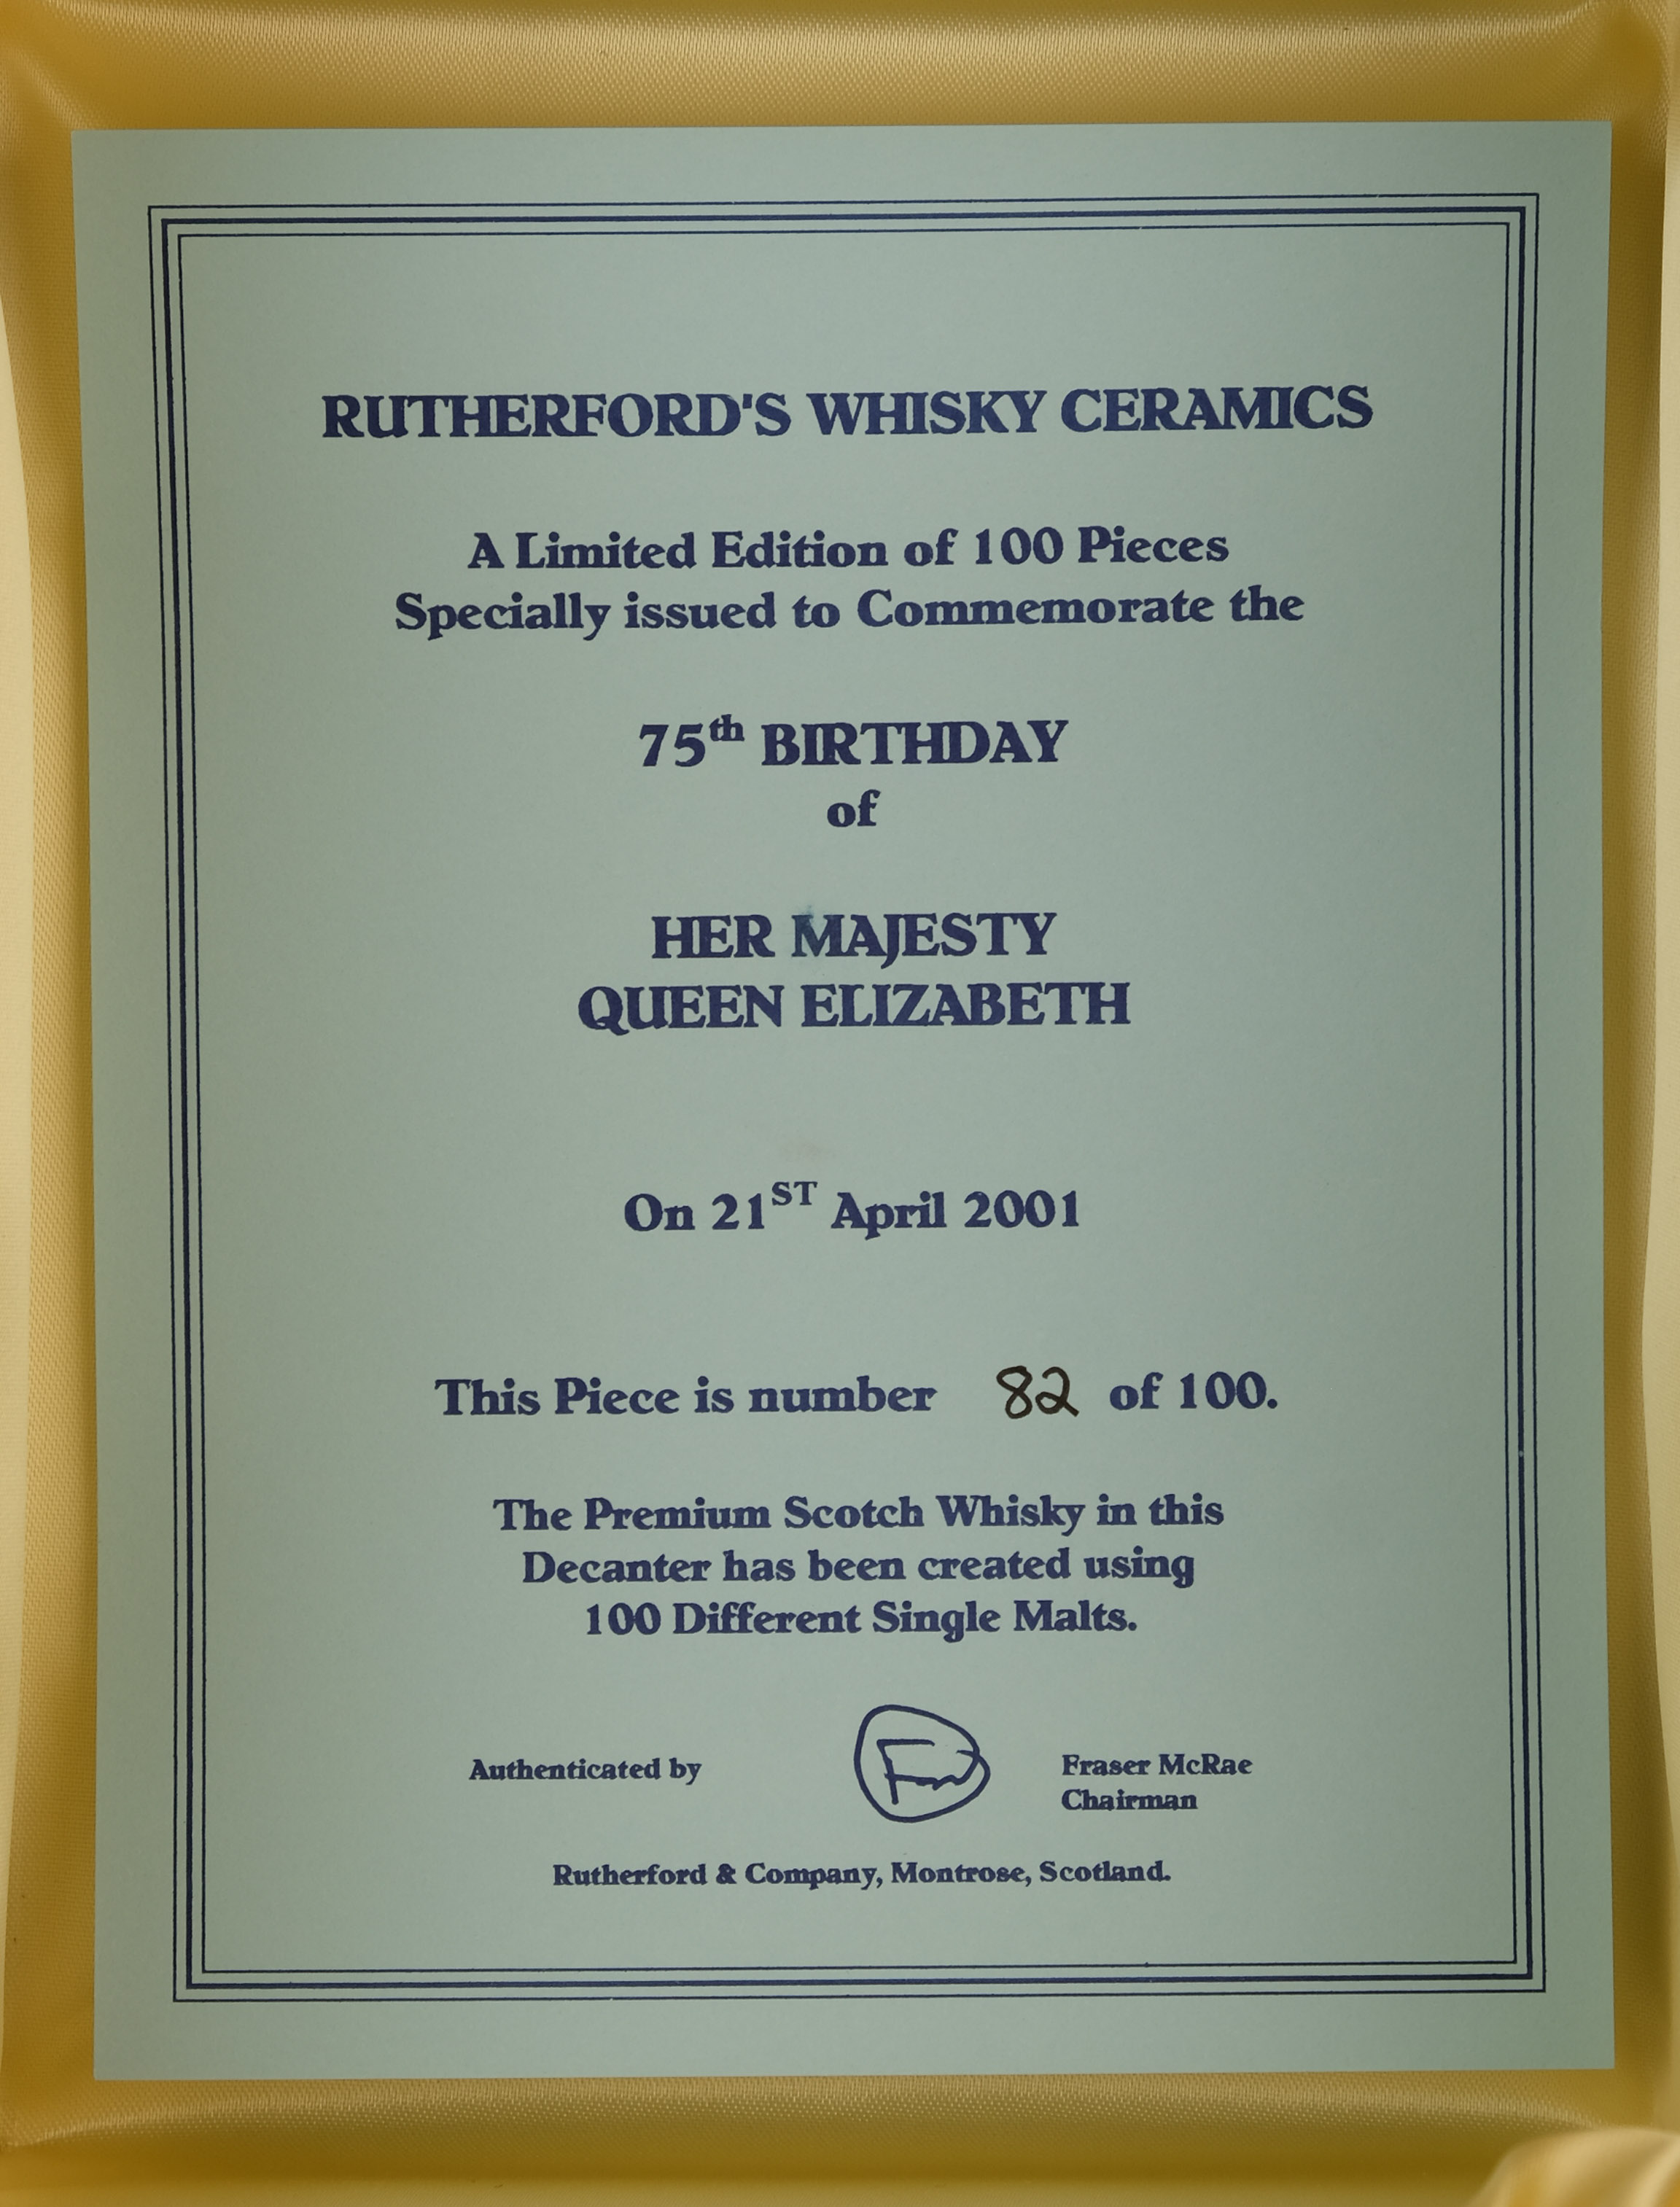 Rutherfords To Commemorate The 75th Birthday Of Her Majesty Queen Elizabeth